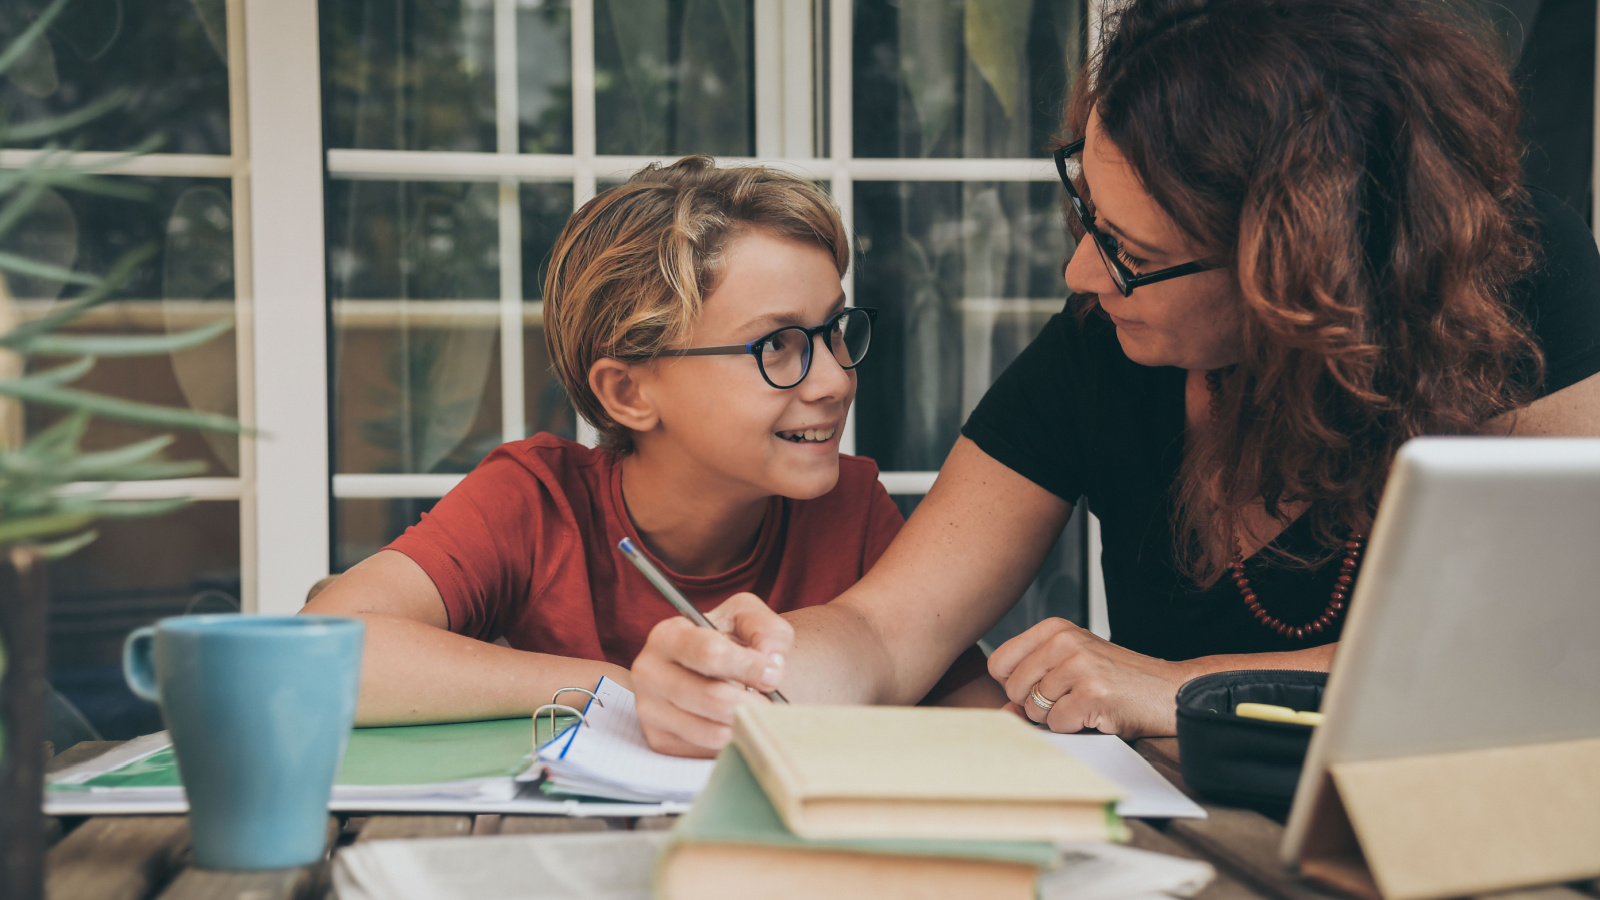 image credit: Fabio Principe/Shutterstock <p><span>Unbeknownst to many parents, not all school districts nationwide rely on phonics as the main thrust of reading instruction, and student achievement is astoundingly low nationwide. A bill in the CA legislature seeks to address this disparity by forcing the adoption of phonics in reading instruction.</span></p>